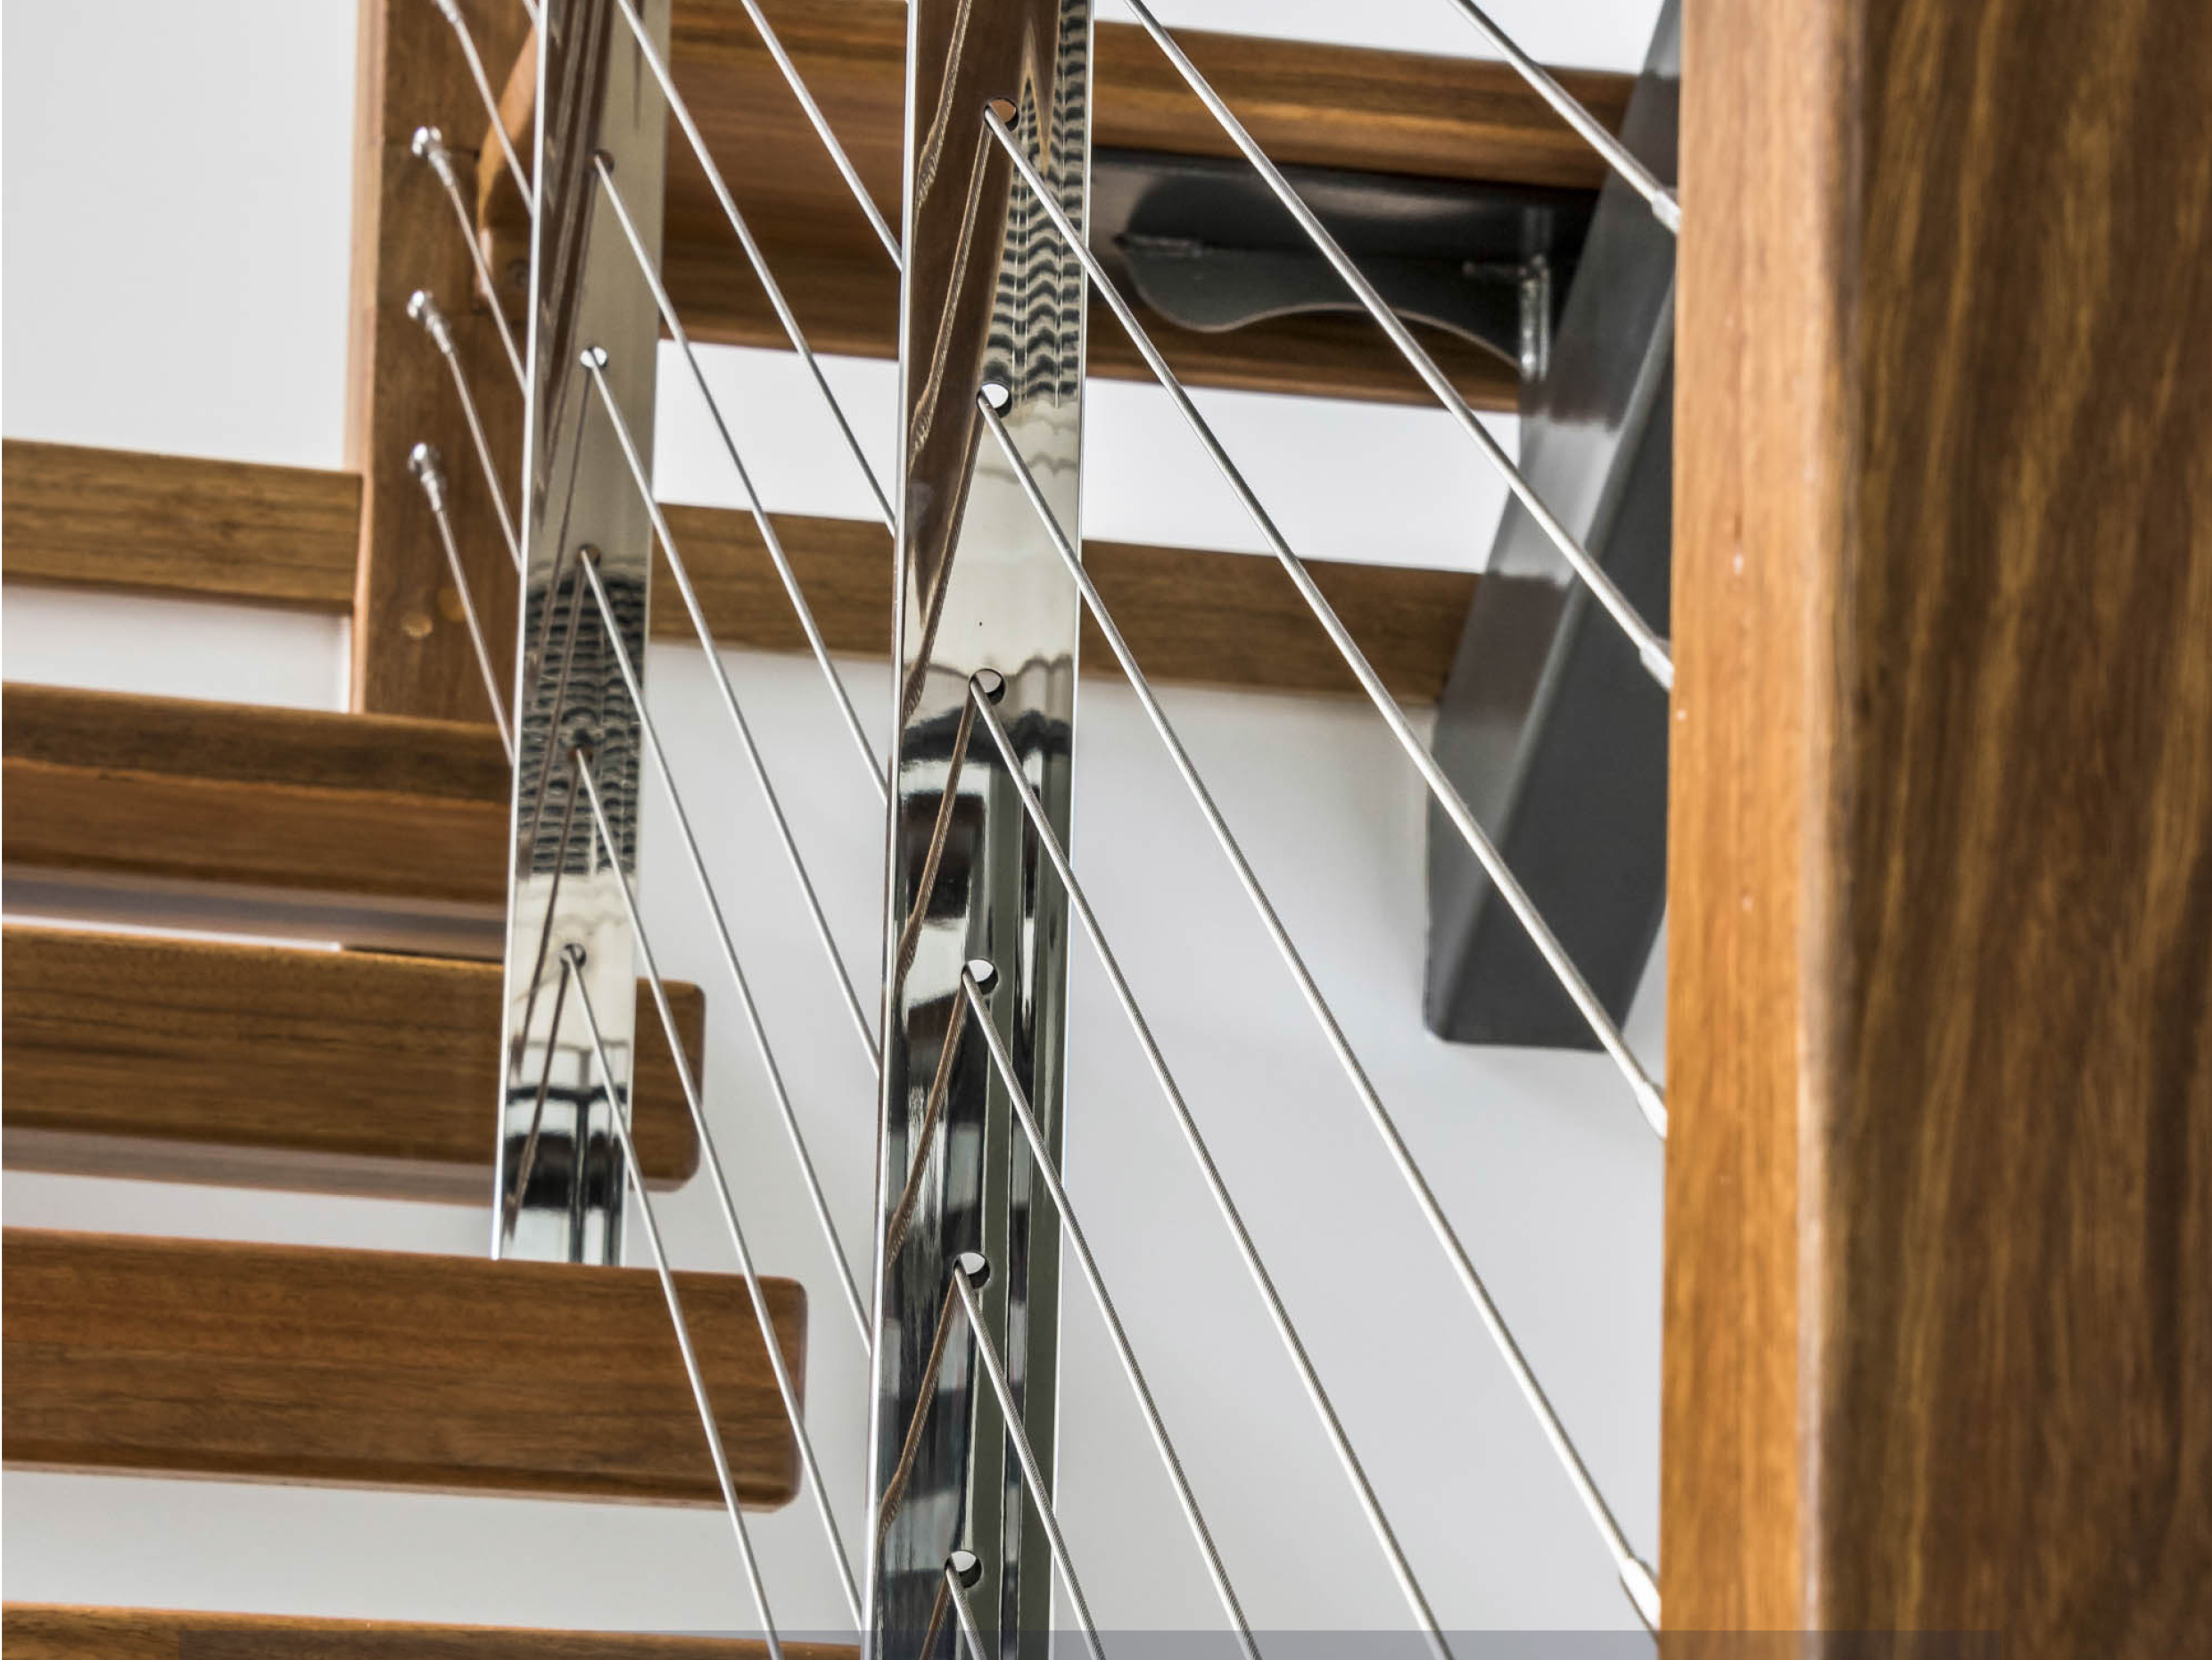 Specifications Guide for Balustrade Systems
